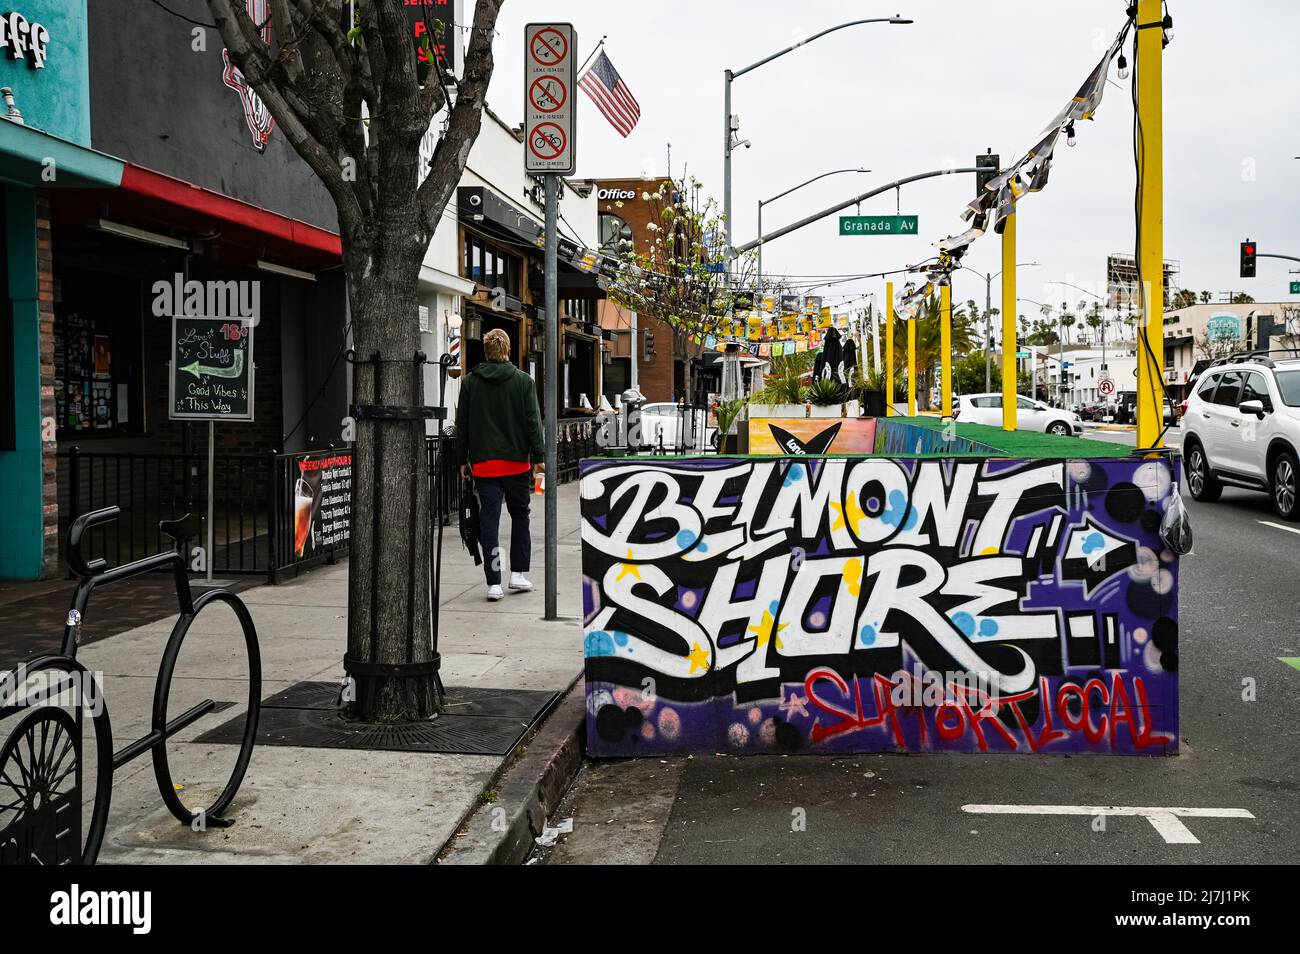 Photo of a Support Local Belmont Shore sign on second street, the popular shopping district in the upscale beach neighborhood. Stock Photo